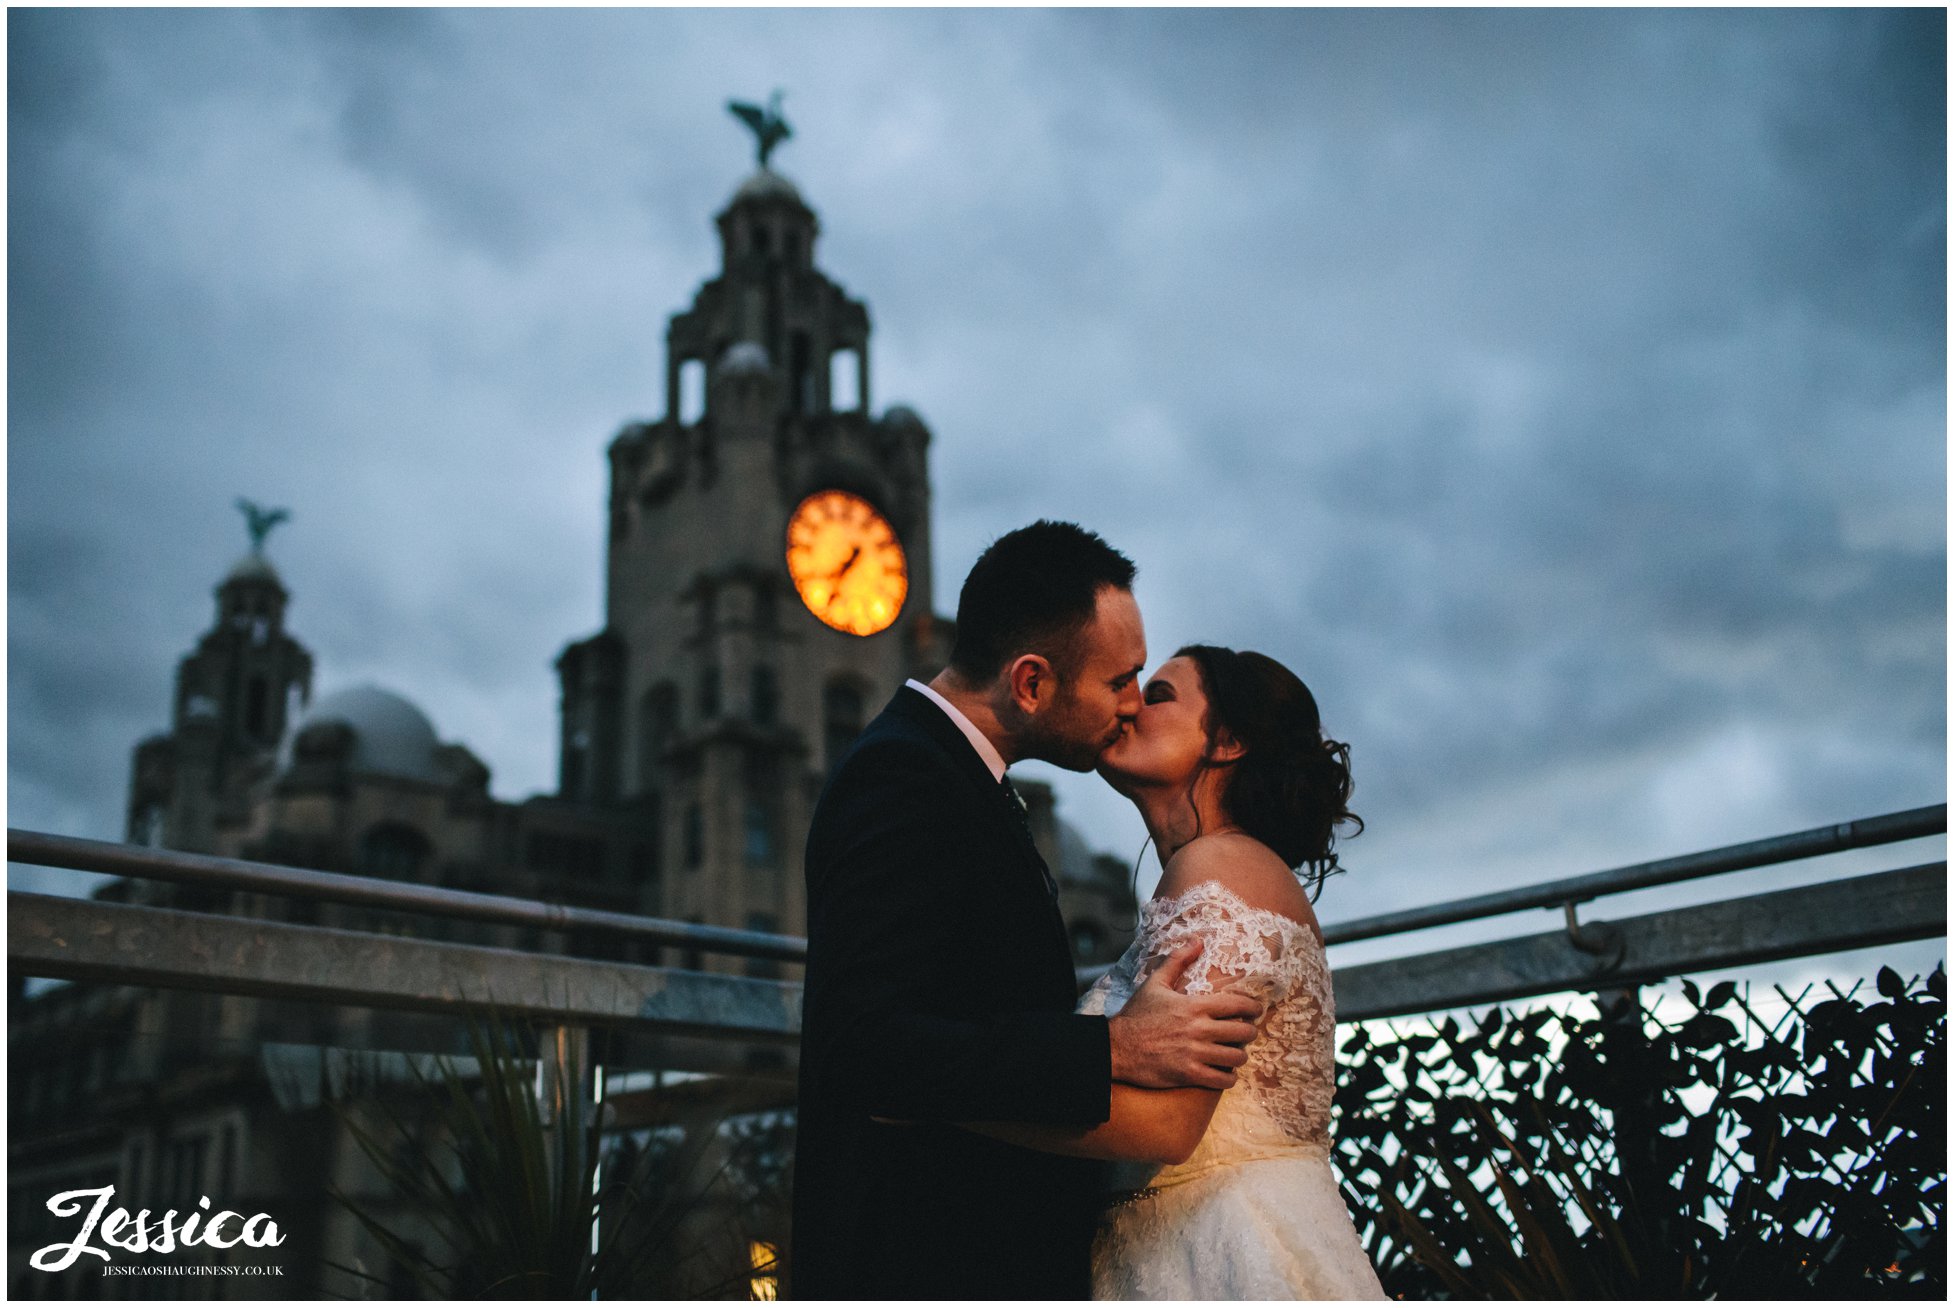 newly wed's kiss in front of liver building at night - oh me oh my rooftop